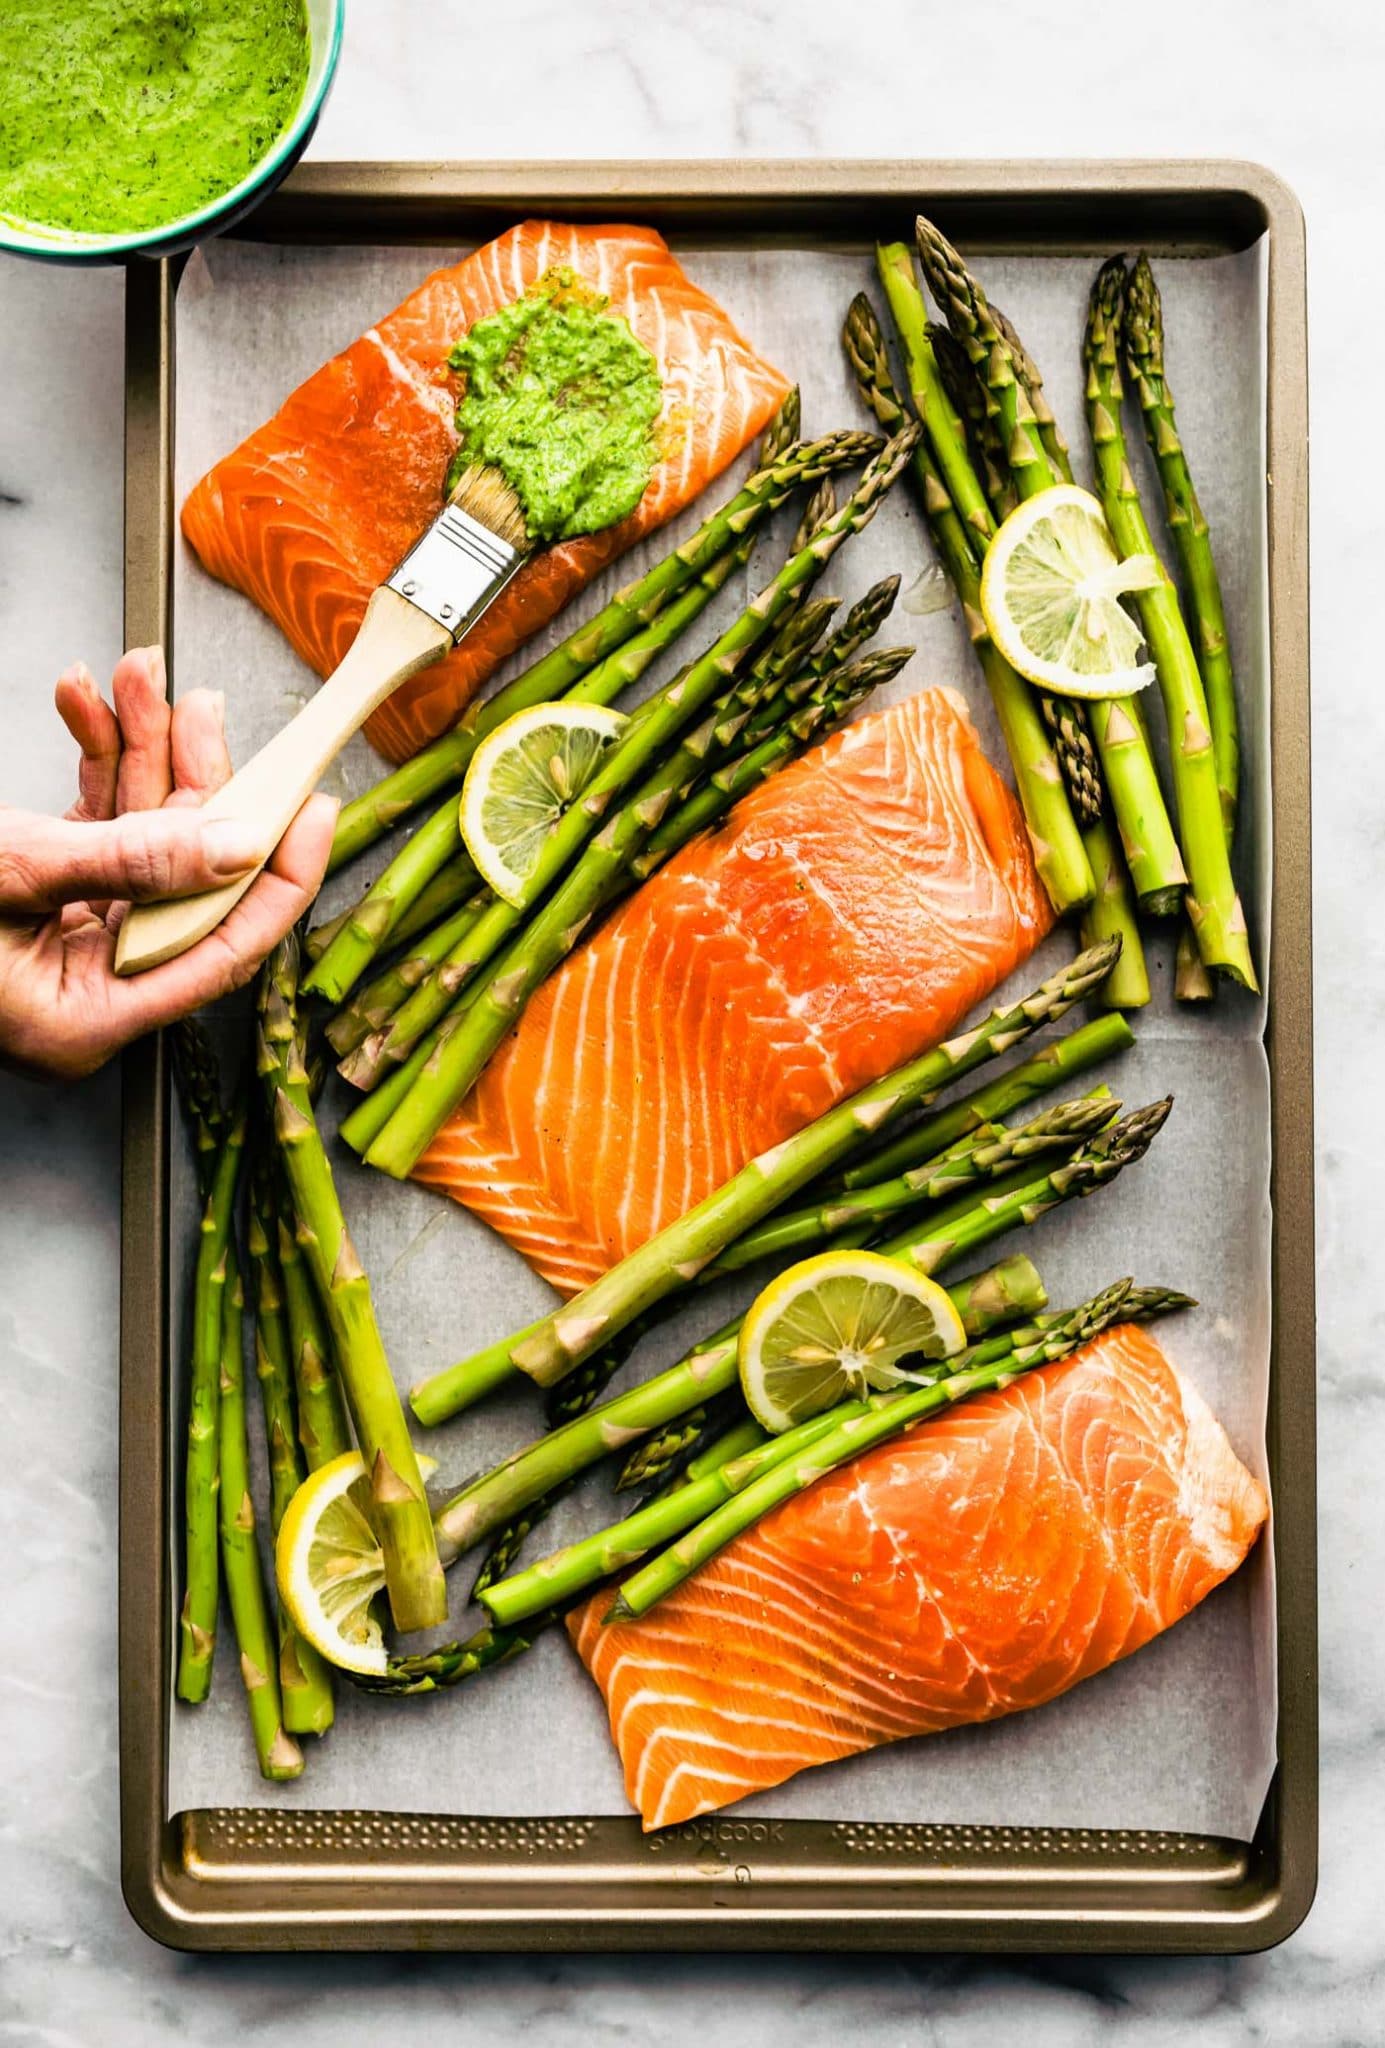 A pastry brush brushing herb sauce on raw salmon filet; baking sheet with three salmon filets and asparagus spears.